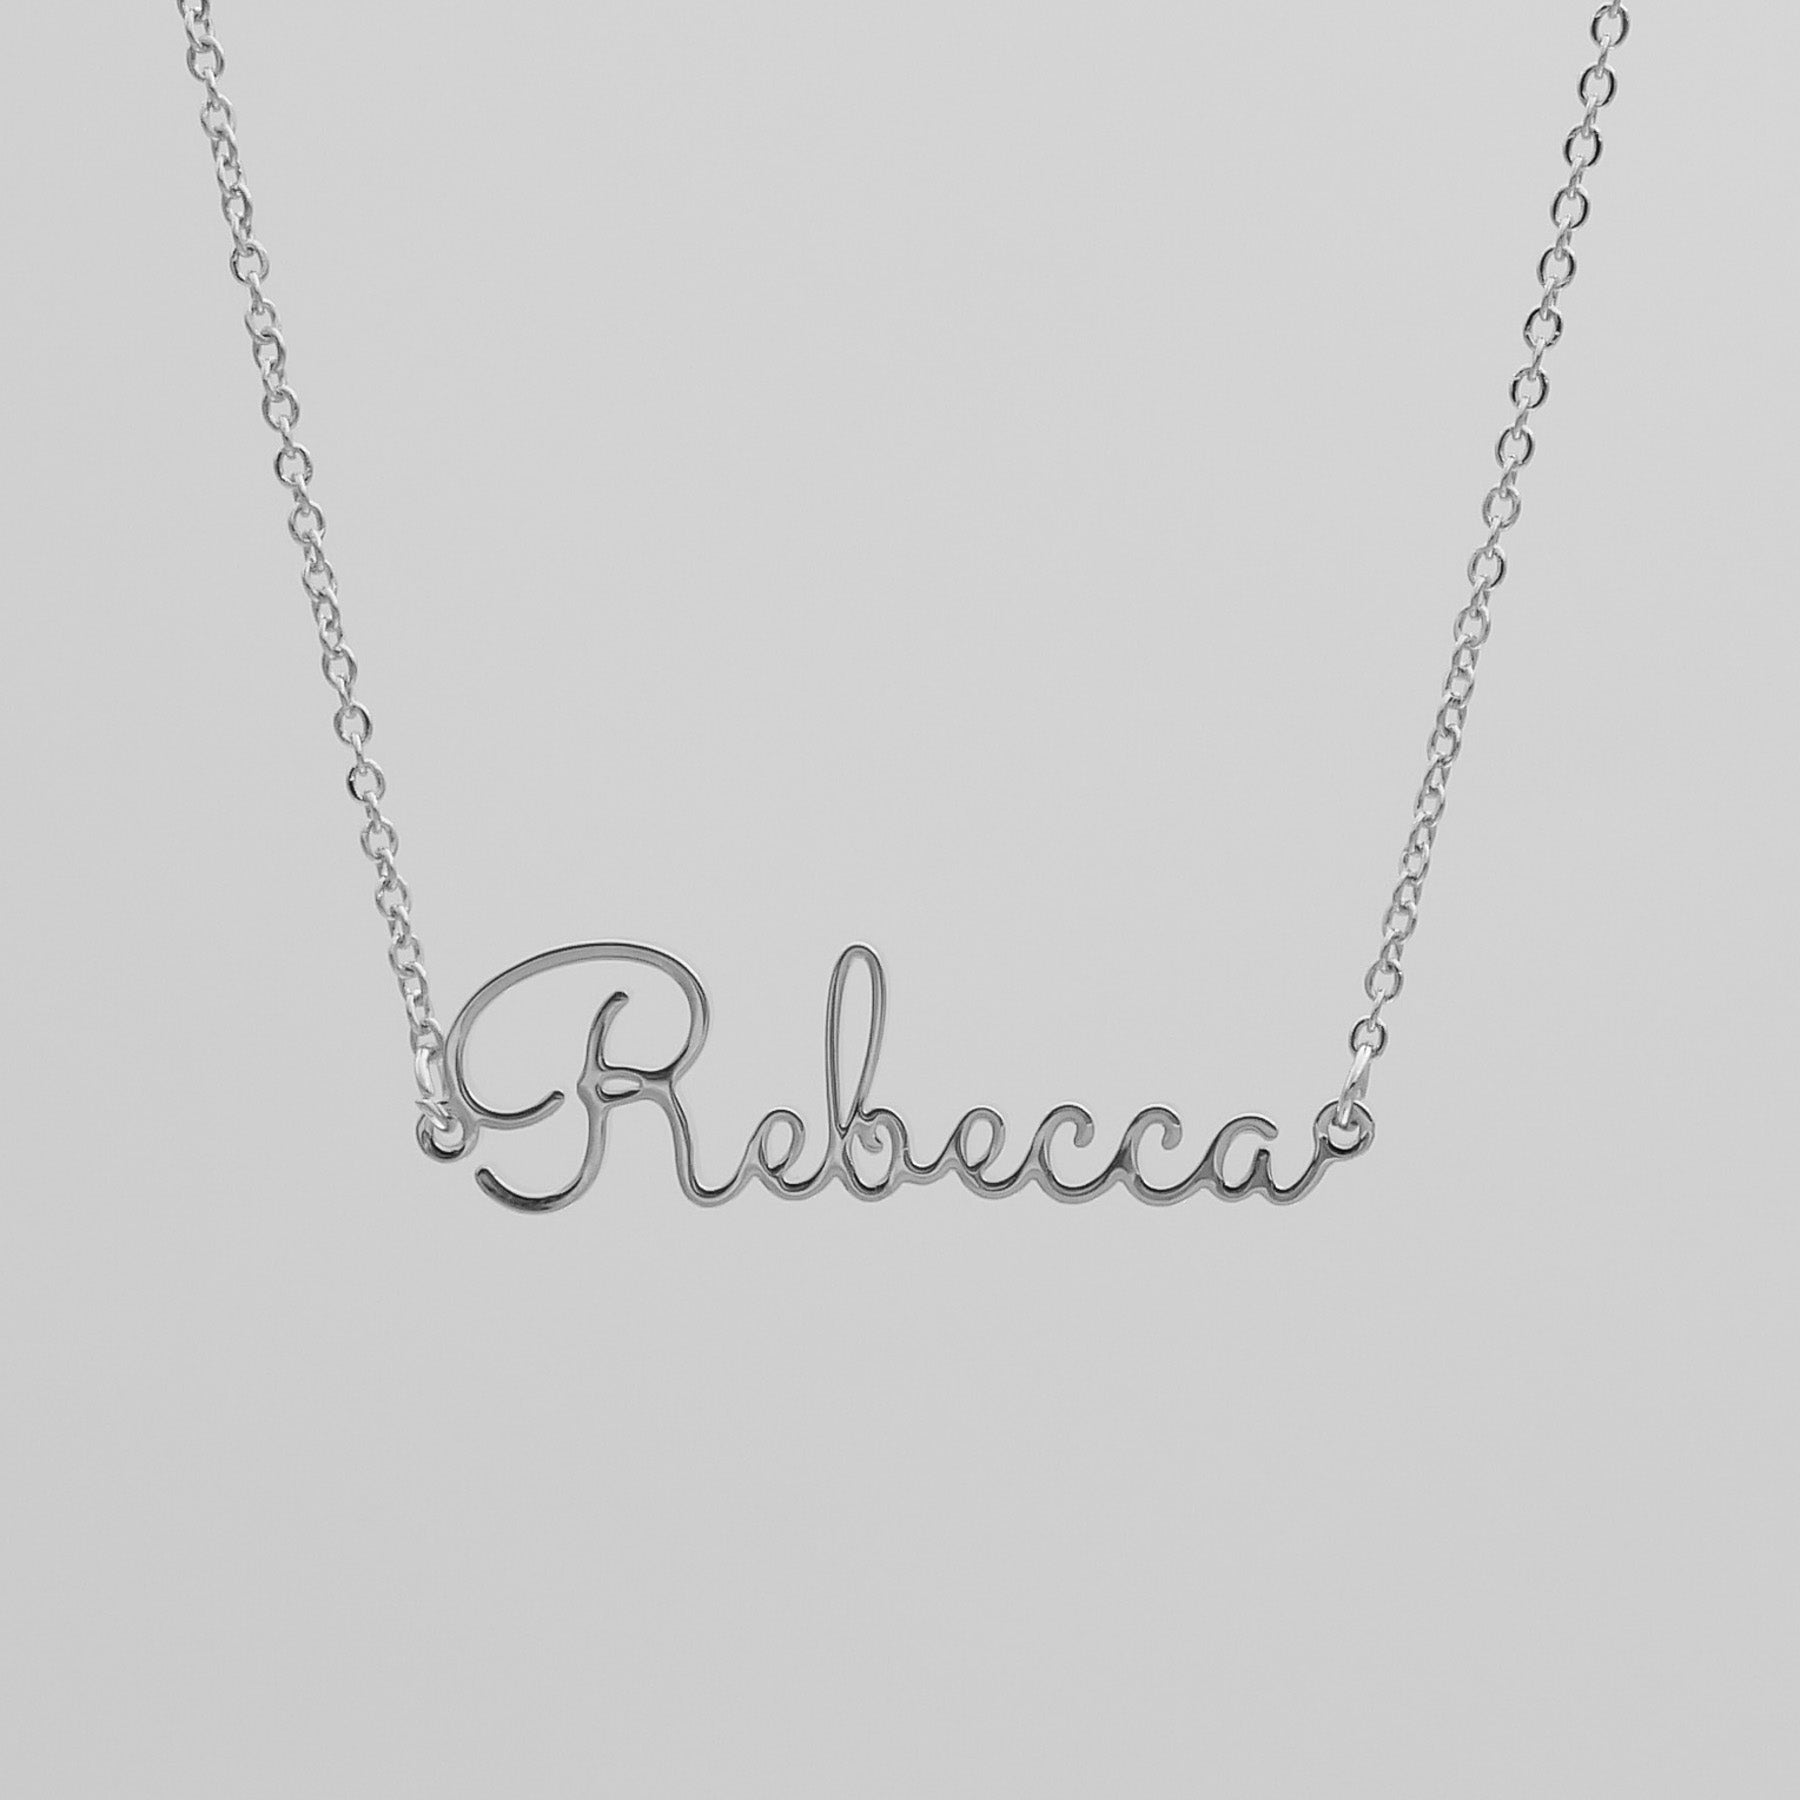 Silver name necklace that says Rebecca